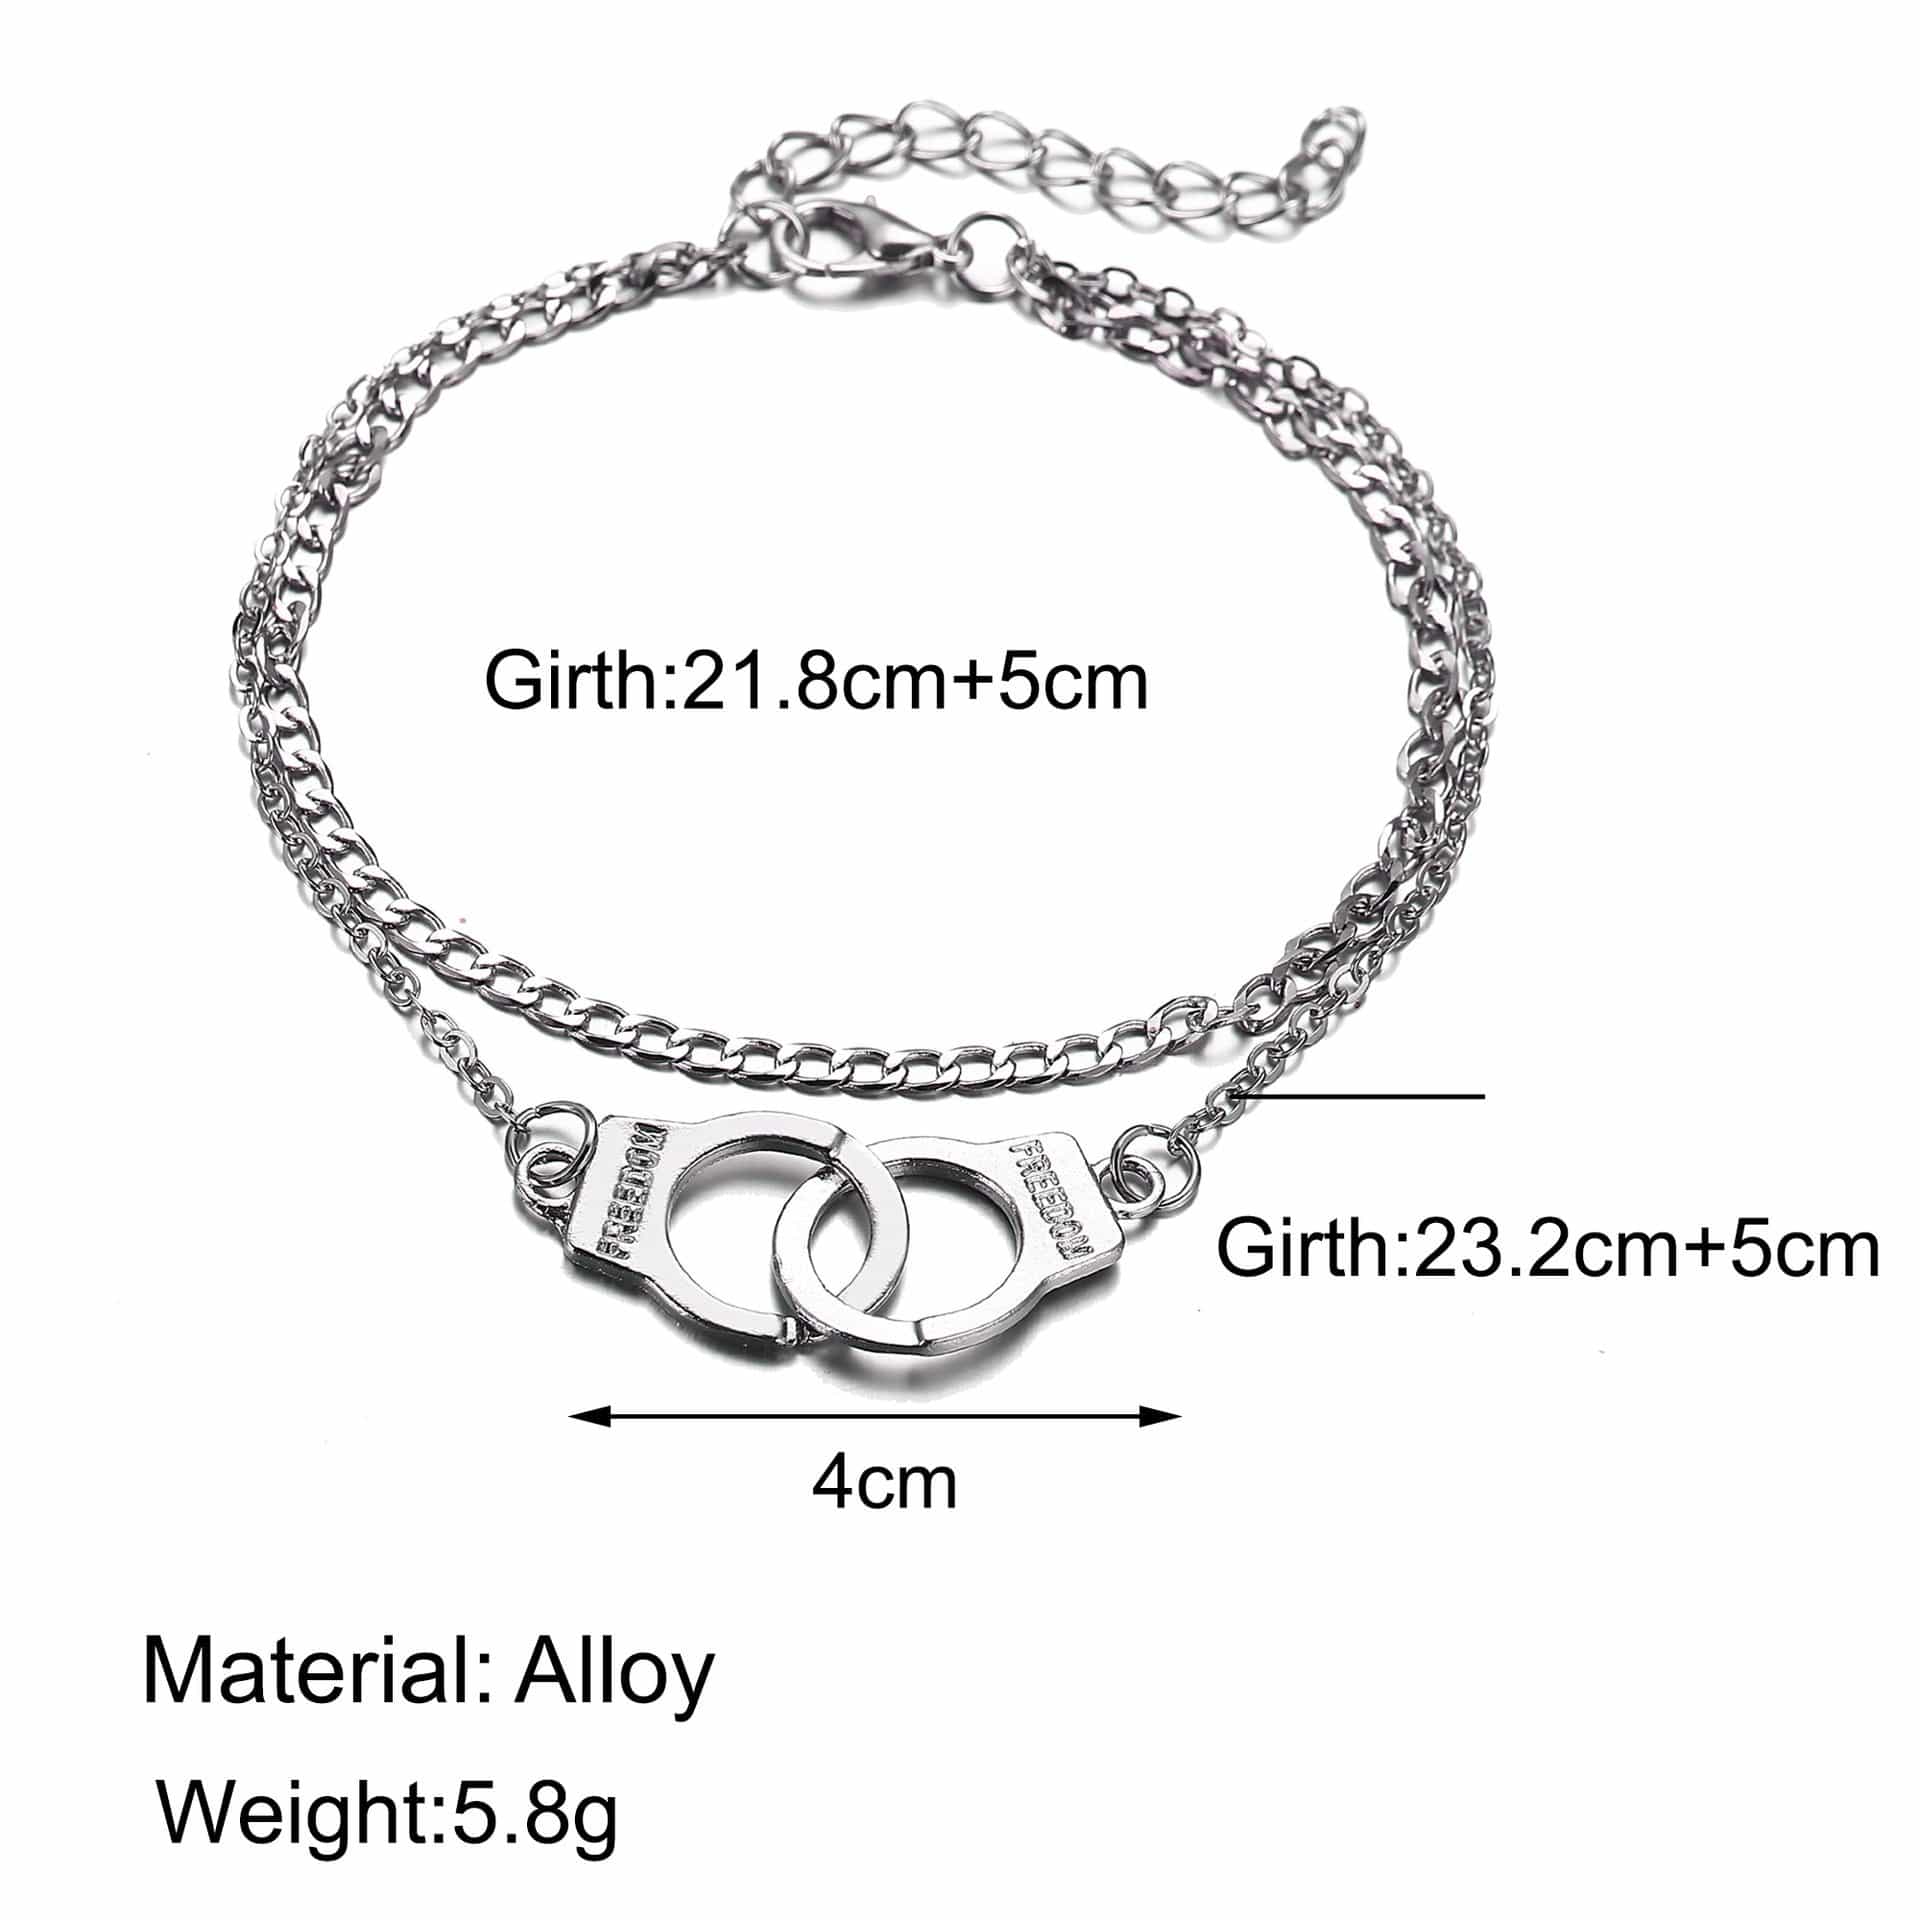 Featuring an image of a hypoallergenic zinc alloy anklet from Miss JQ, crafted for comfort and style, suitable for sensitive skin.